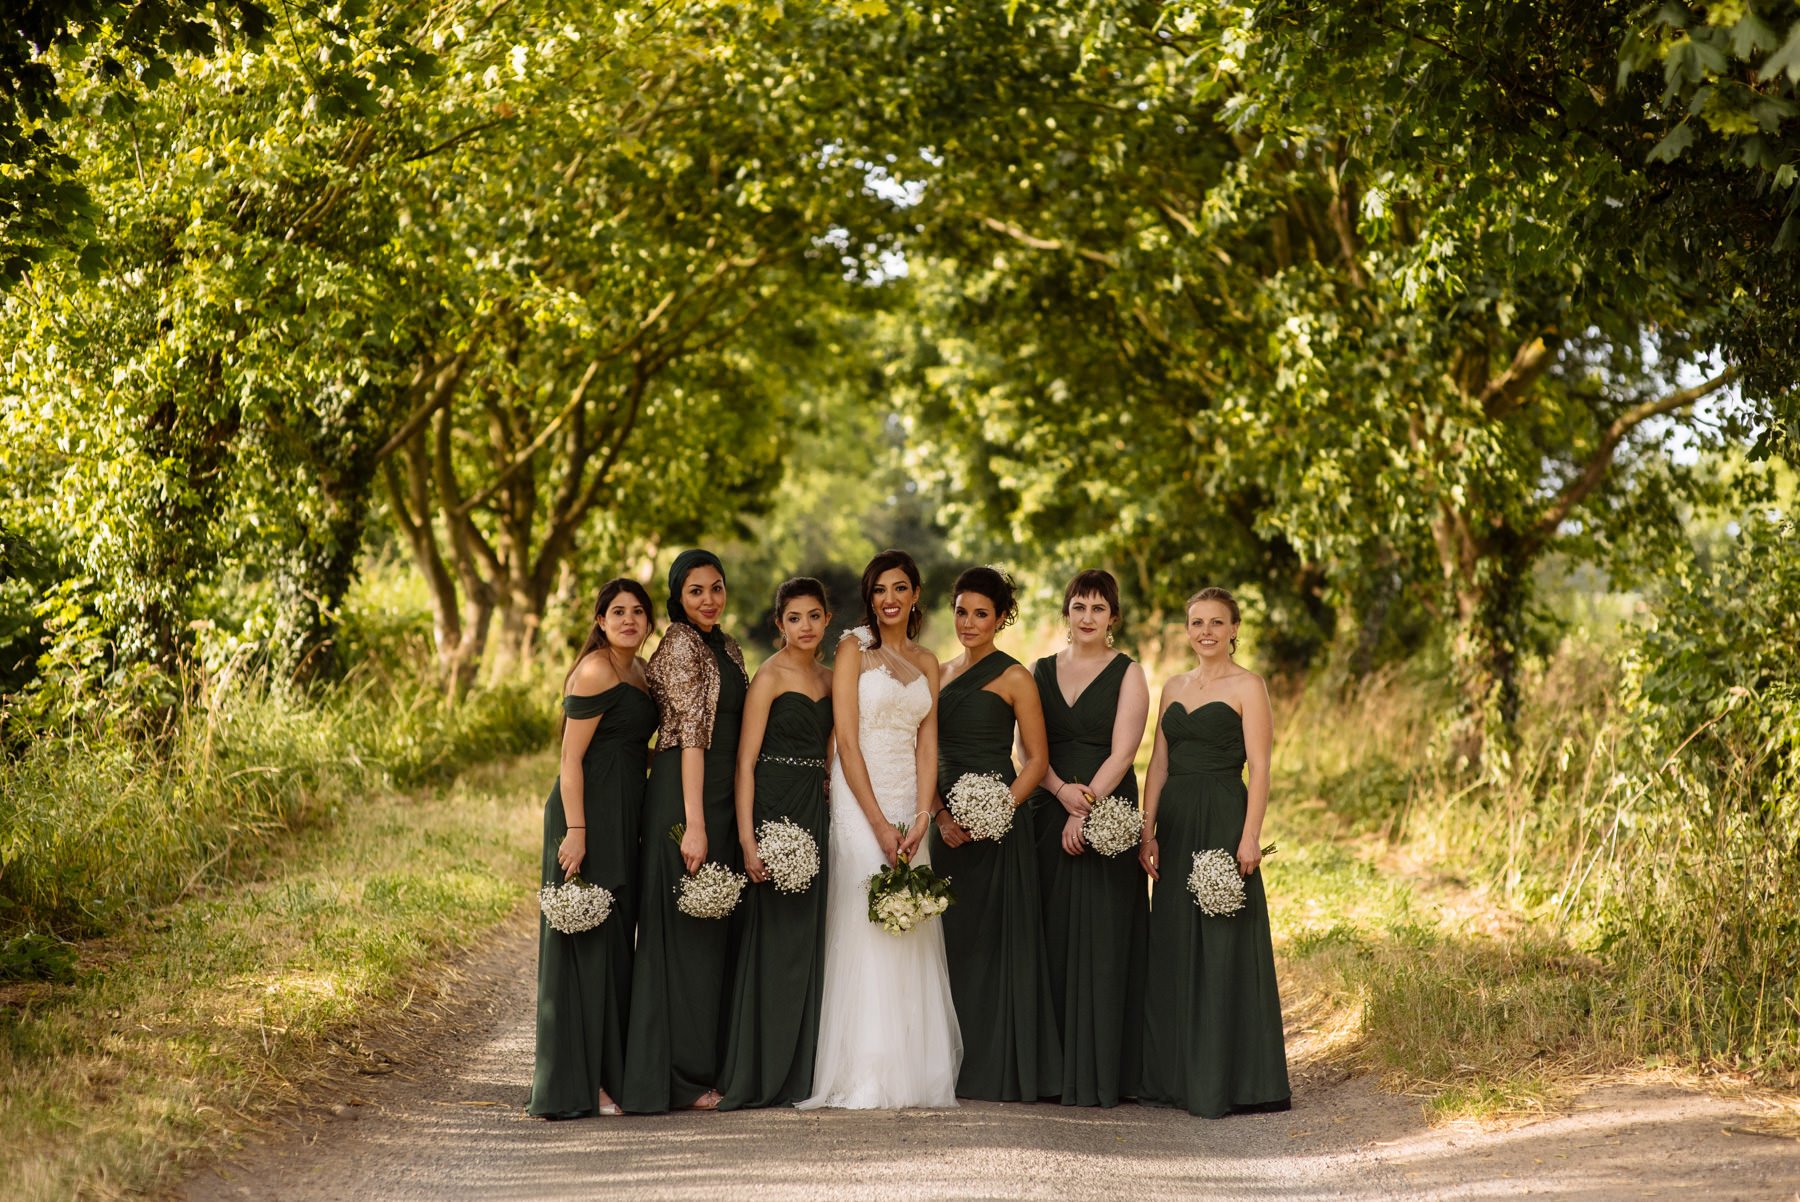 bride with bridesmaids in green gowns normans wedding photographer